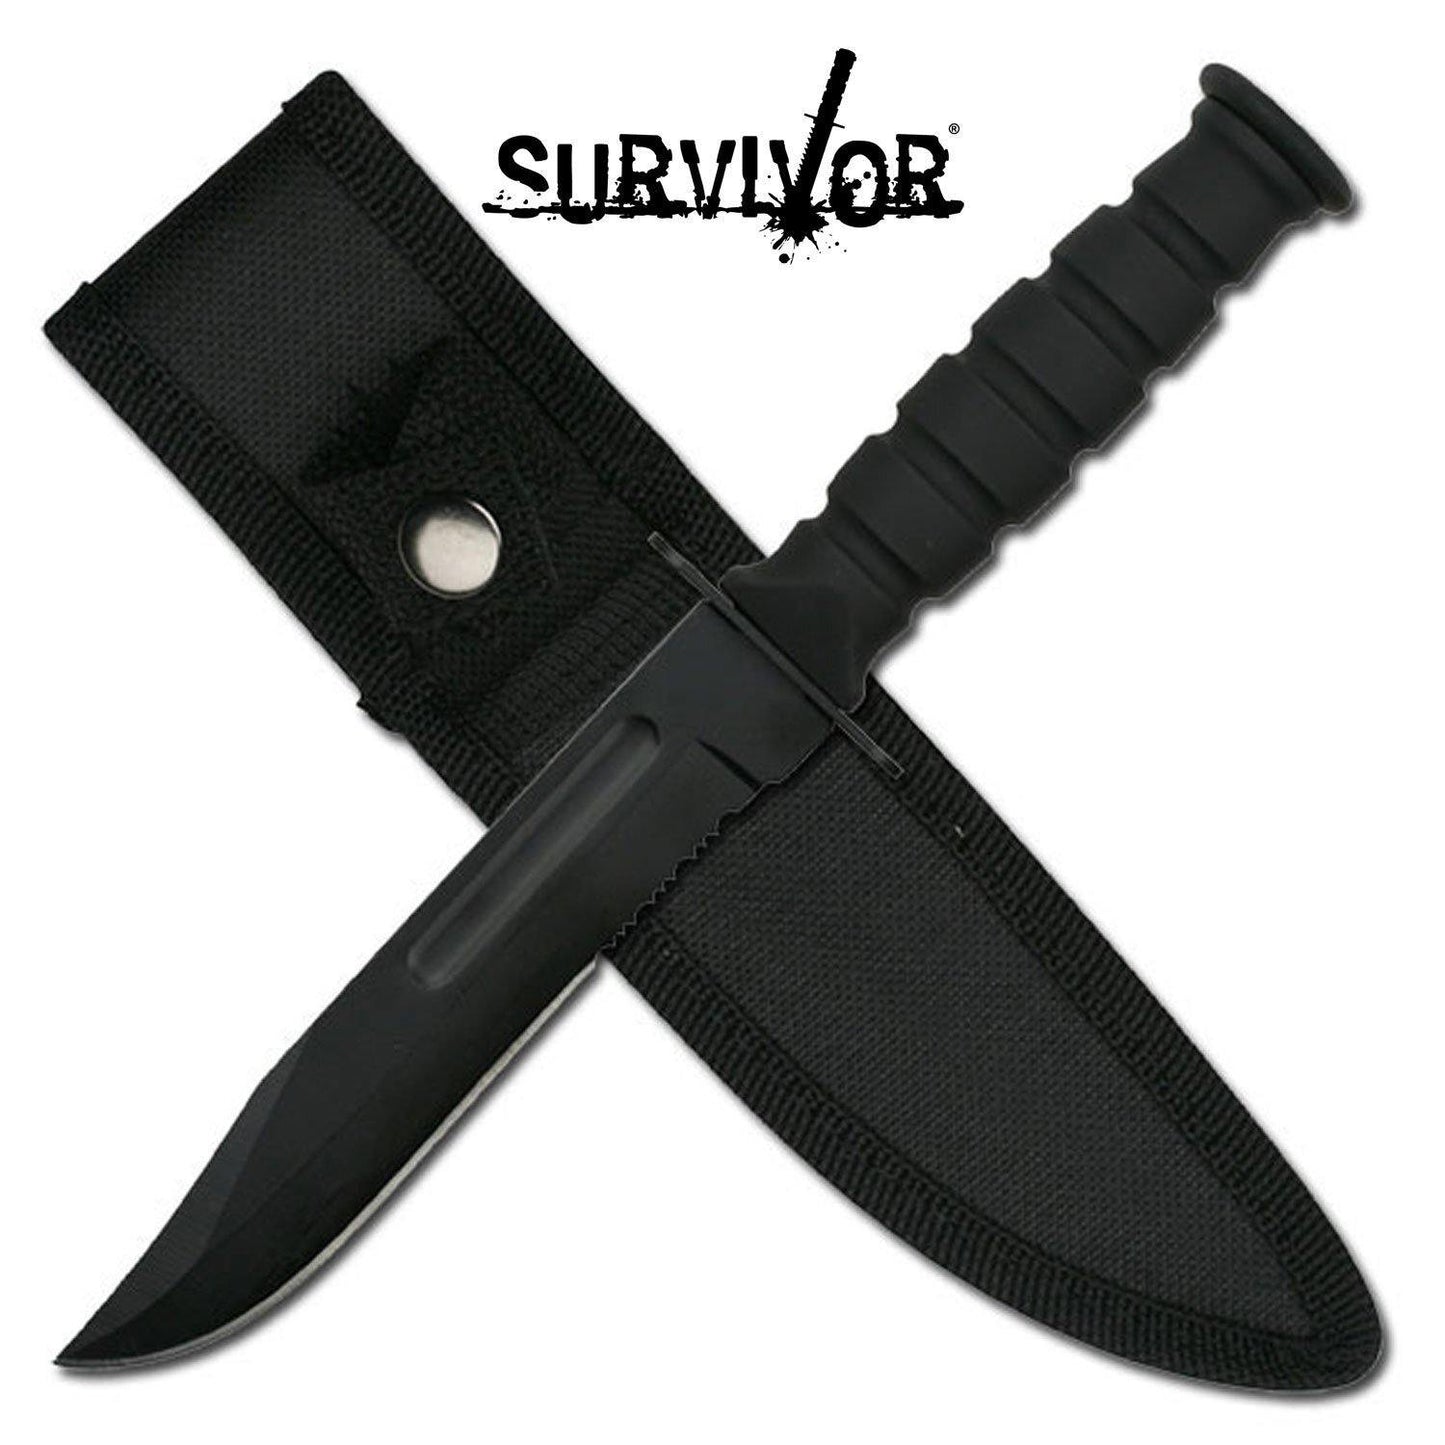 Survivor Bowie Fine Fixed Blade Knife - 7.25 Inches Overall #hk-1023Dp - Xhunter New Zealand